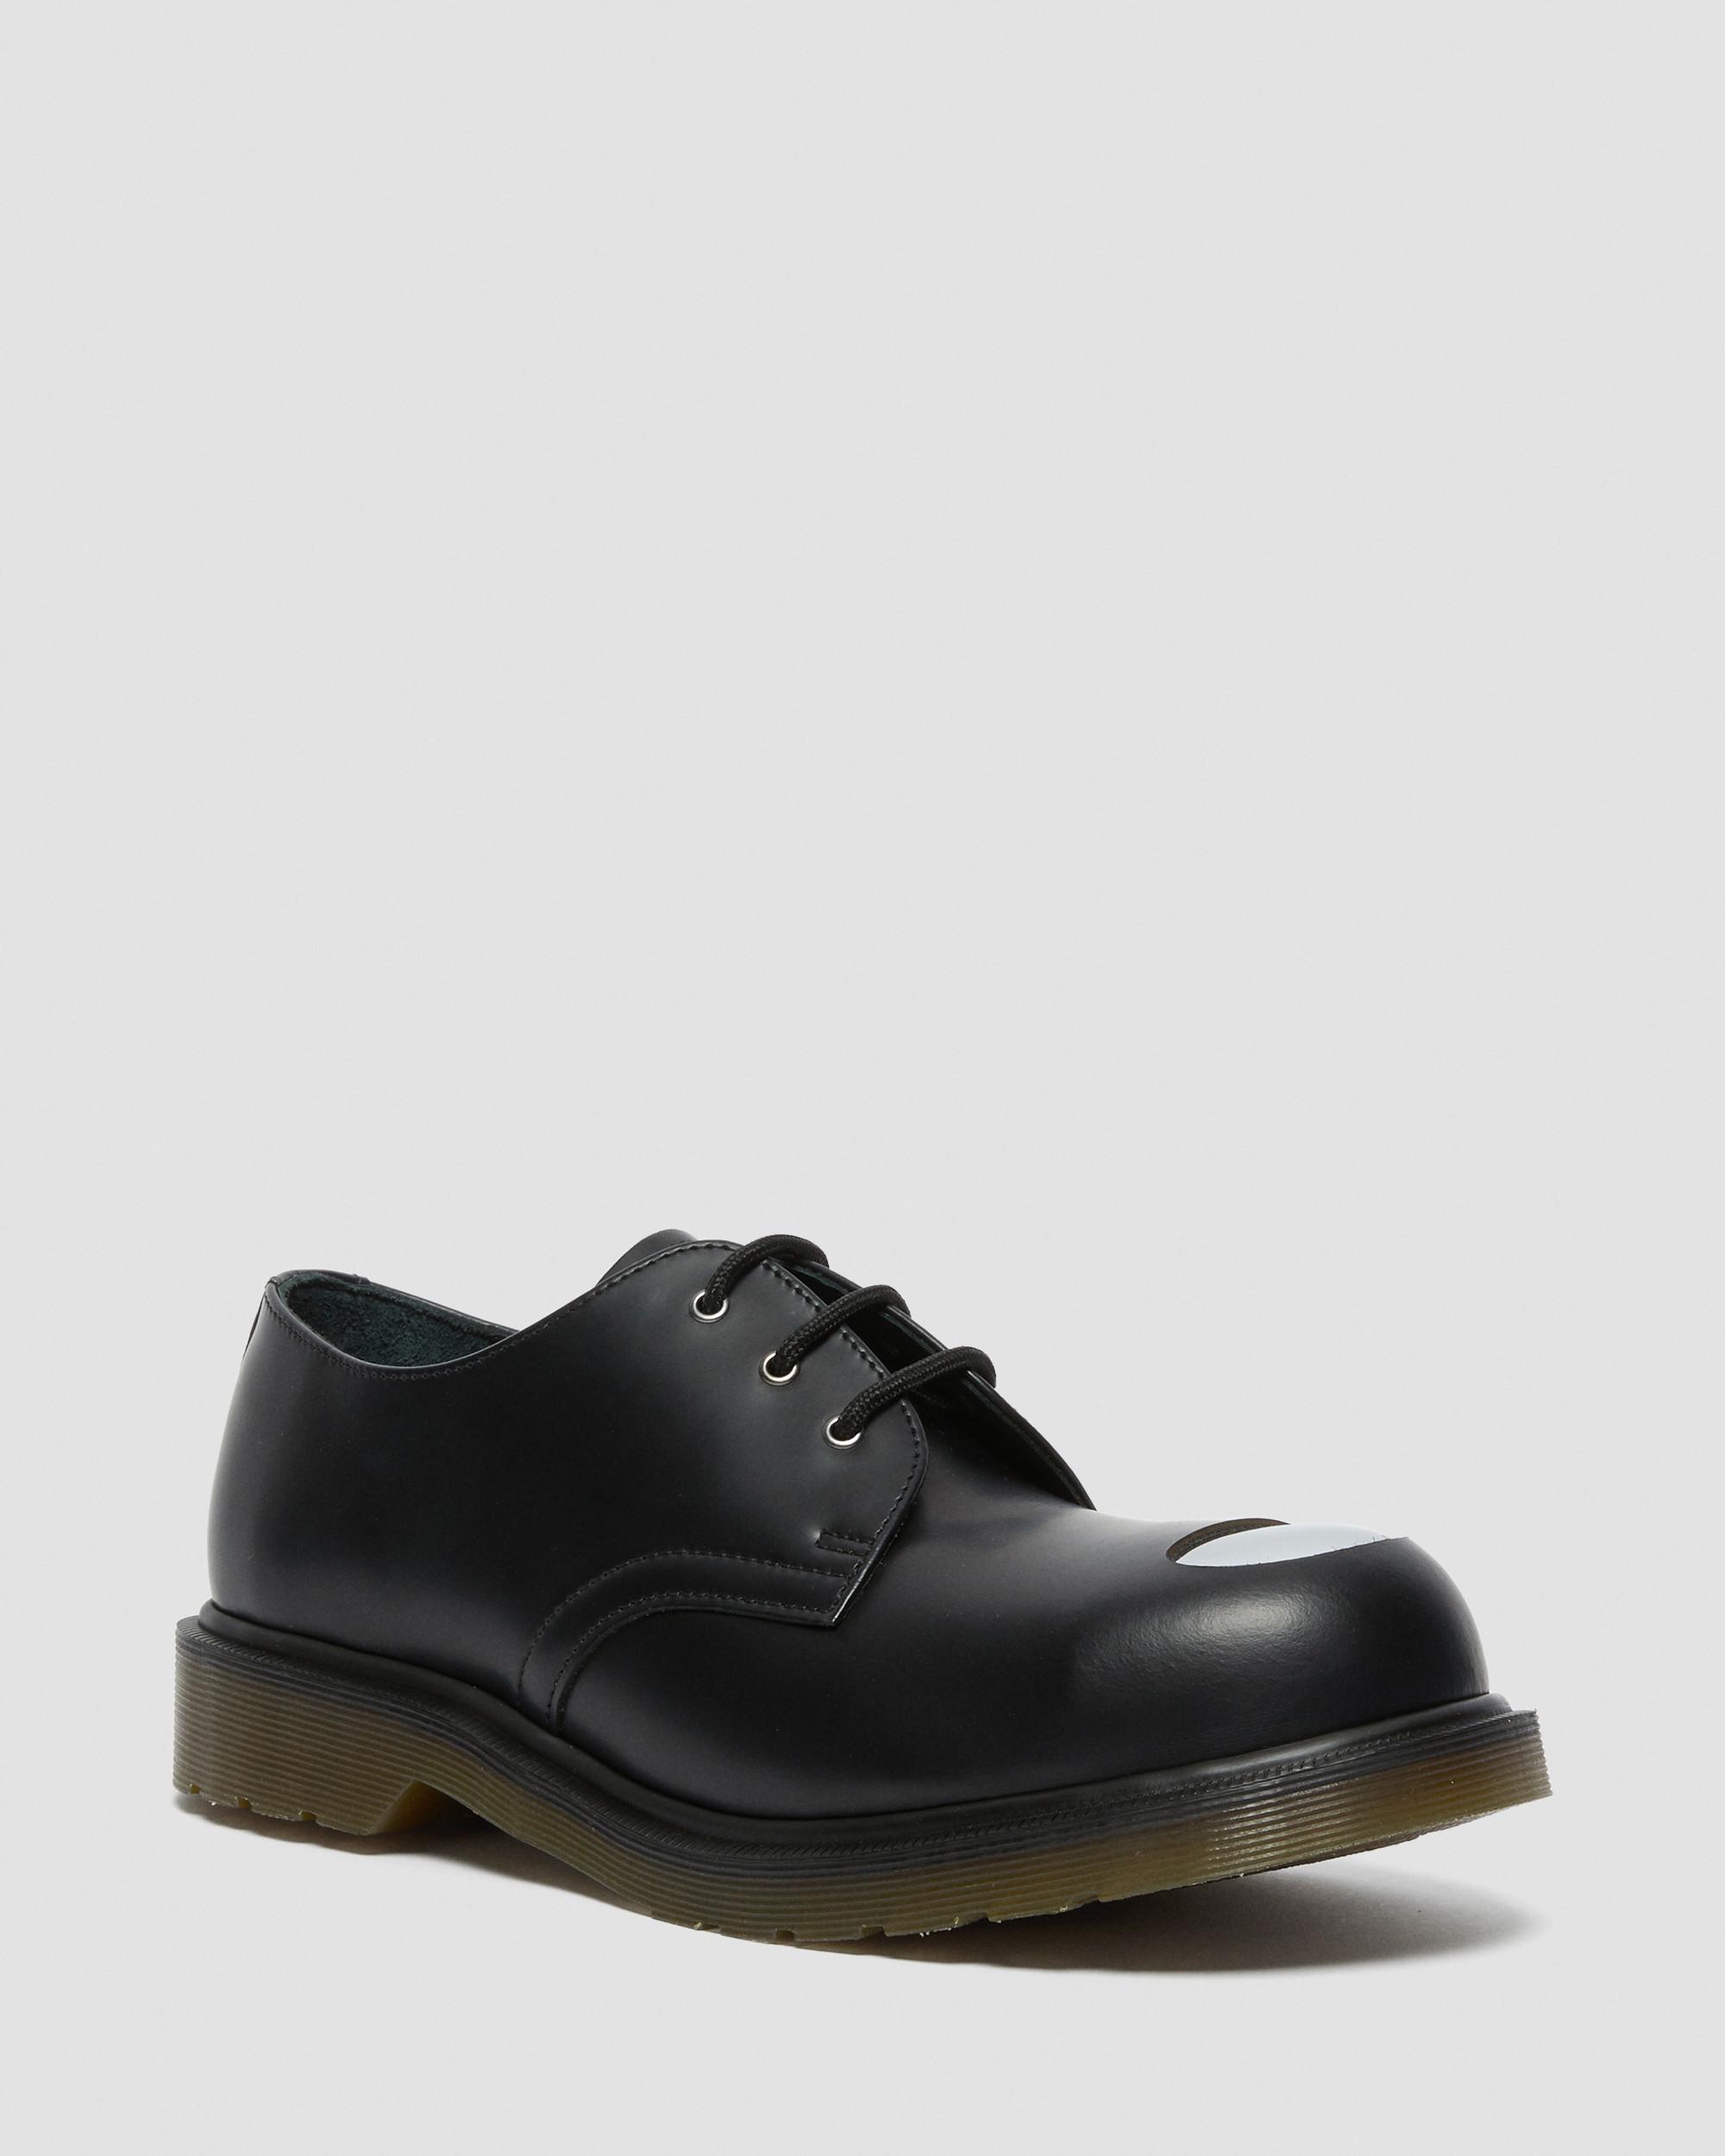 1925 Exposed Steel Toe Leather Shoes in Black | Dr. Martens